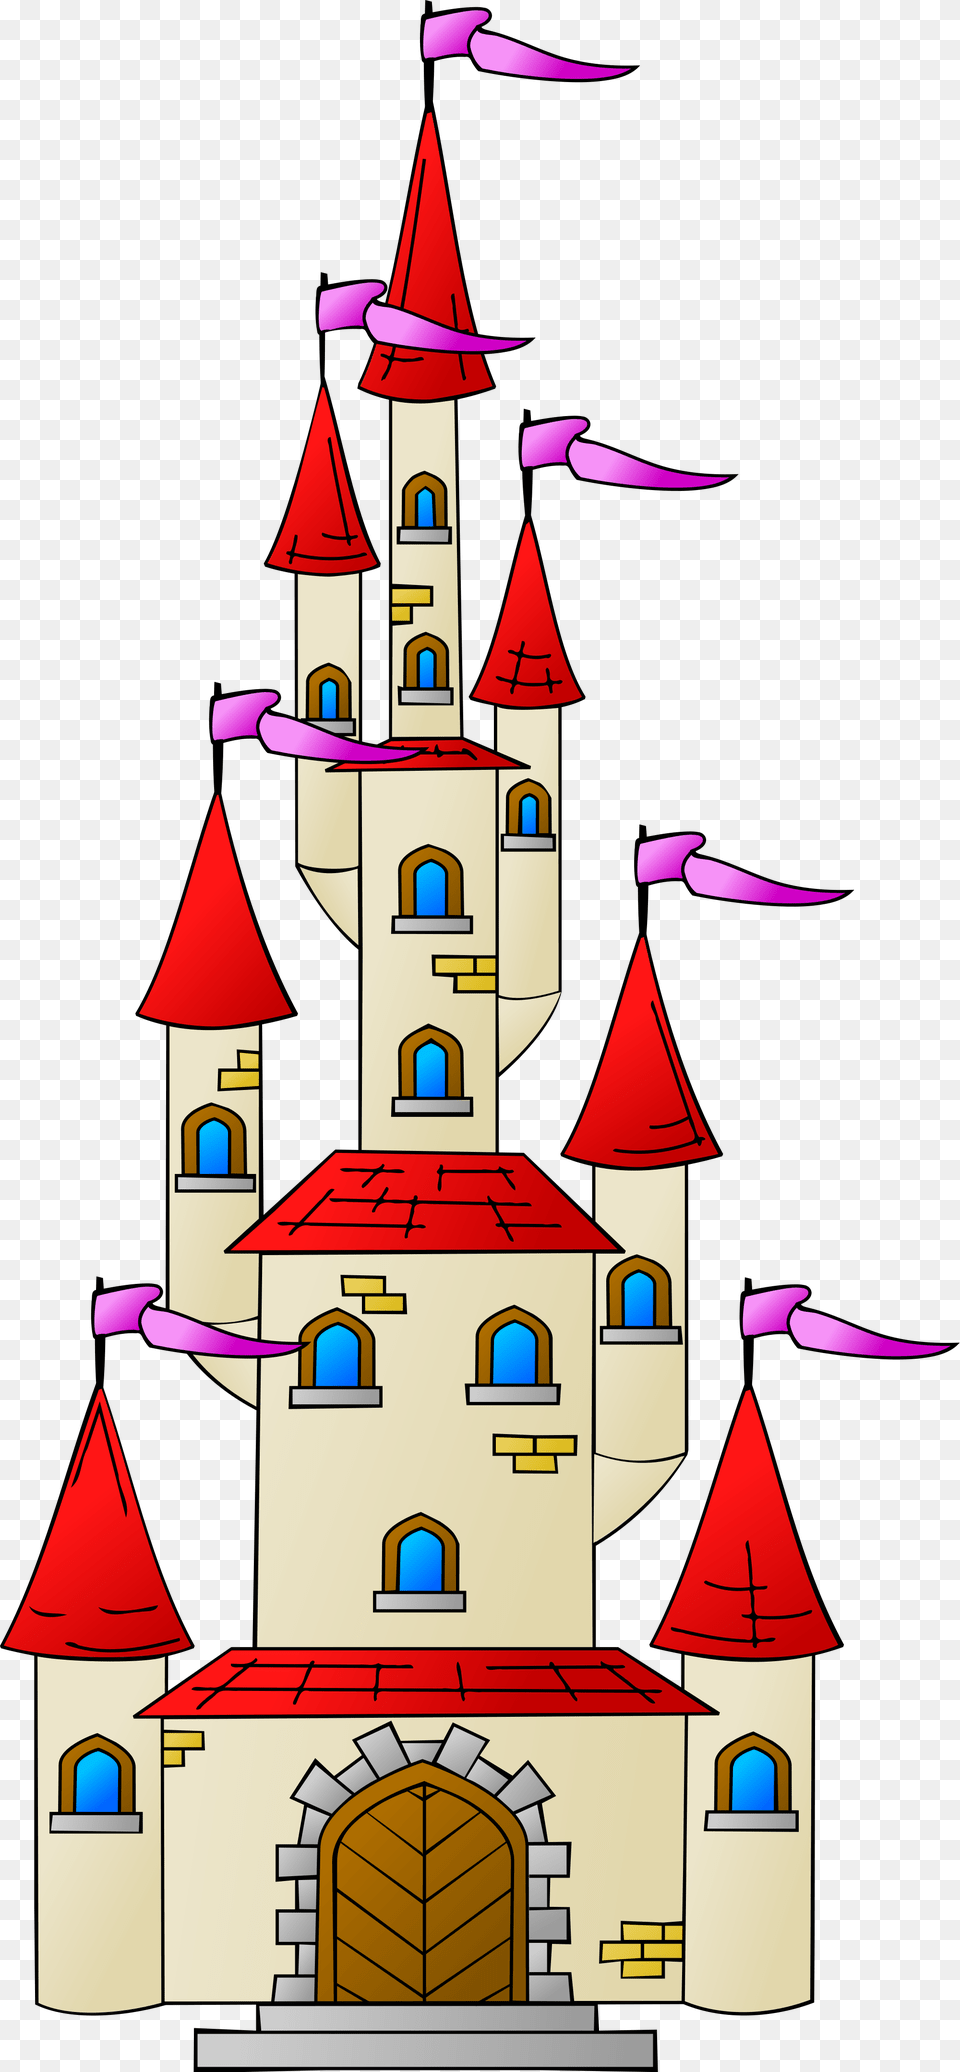 File Castle Svg Wikimedia Open Castle Cliparts, Architecture, Bell Tower, Building, Tower Png